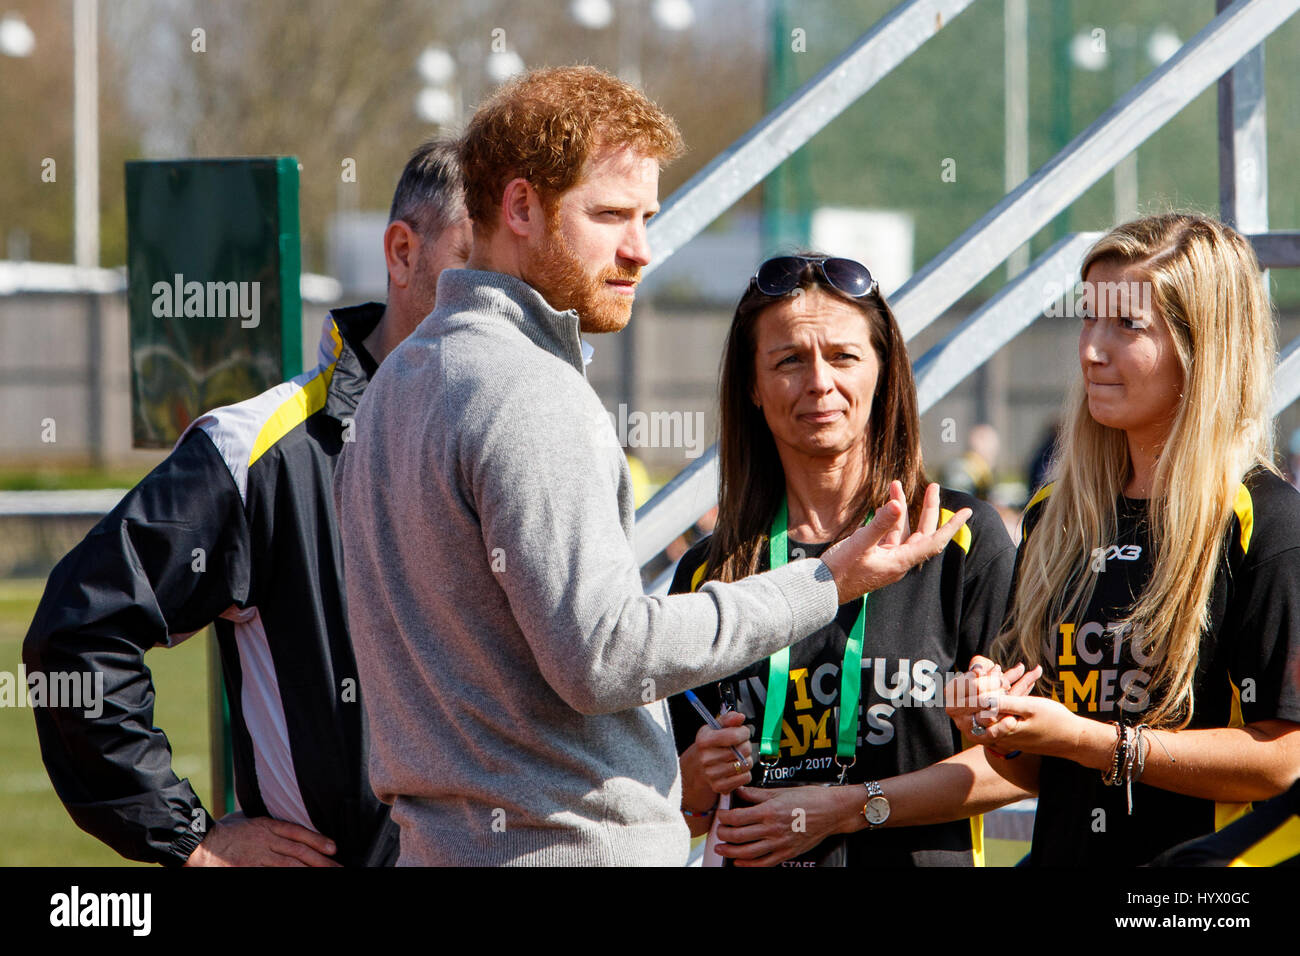 Bath, UK. 7th Apr, 2017. Prince Harry is pictured at the University of Bath Sports Training Village as he attends the UK team trials for the 2017 Invictus Games. The games are a sporting event for injured active duty and veteran service members, more than 550 competitors from 17 nations will compete in a dozen adaptive sports in Toronto, Canada in September 2017. Credit: lynchpics/Alamy Live News Stock Photo